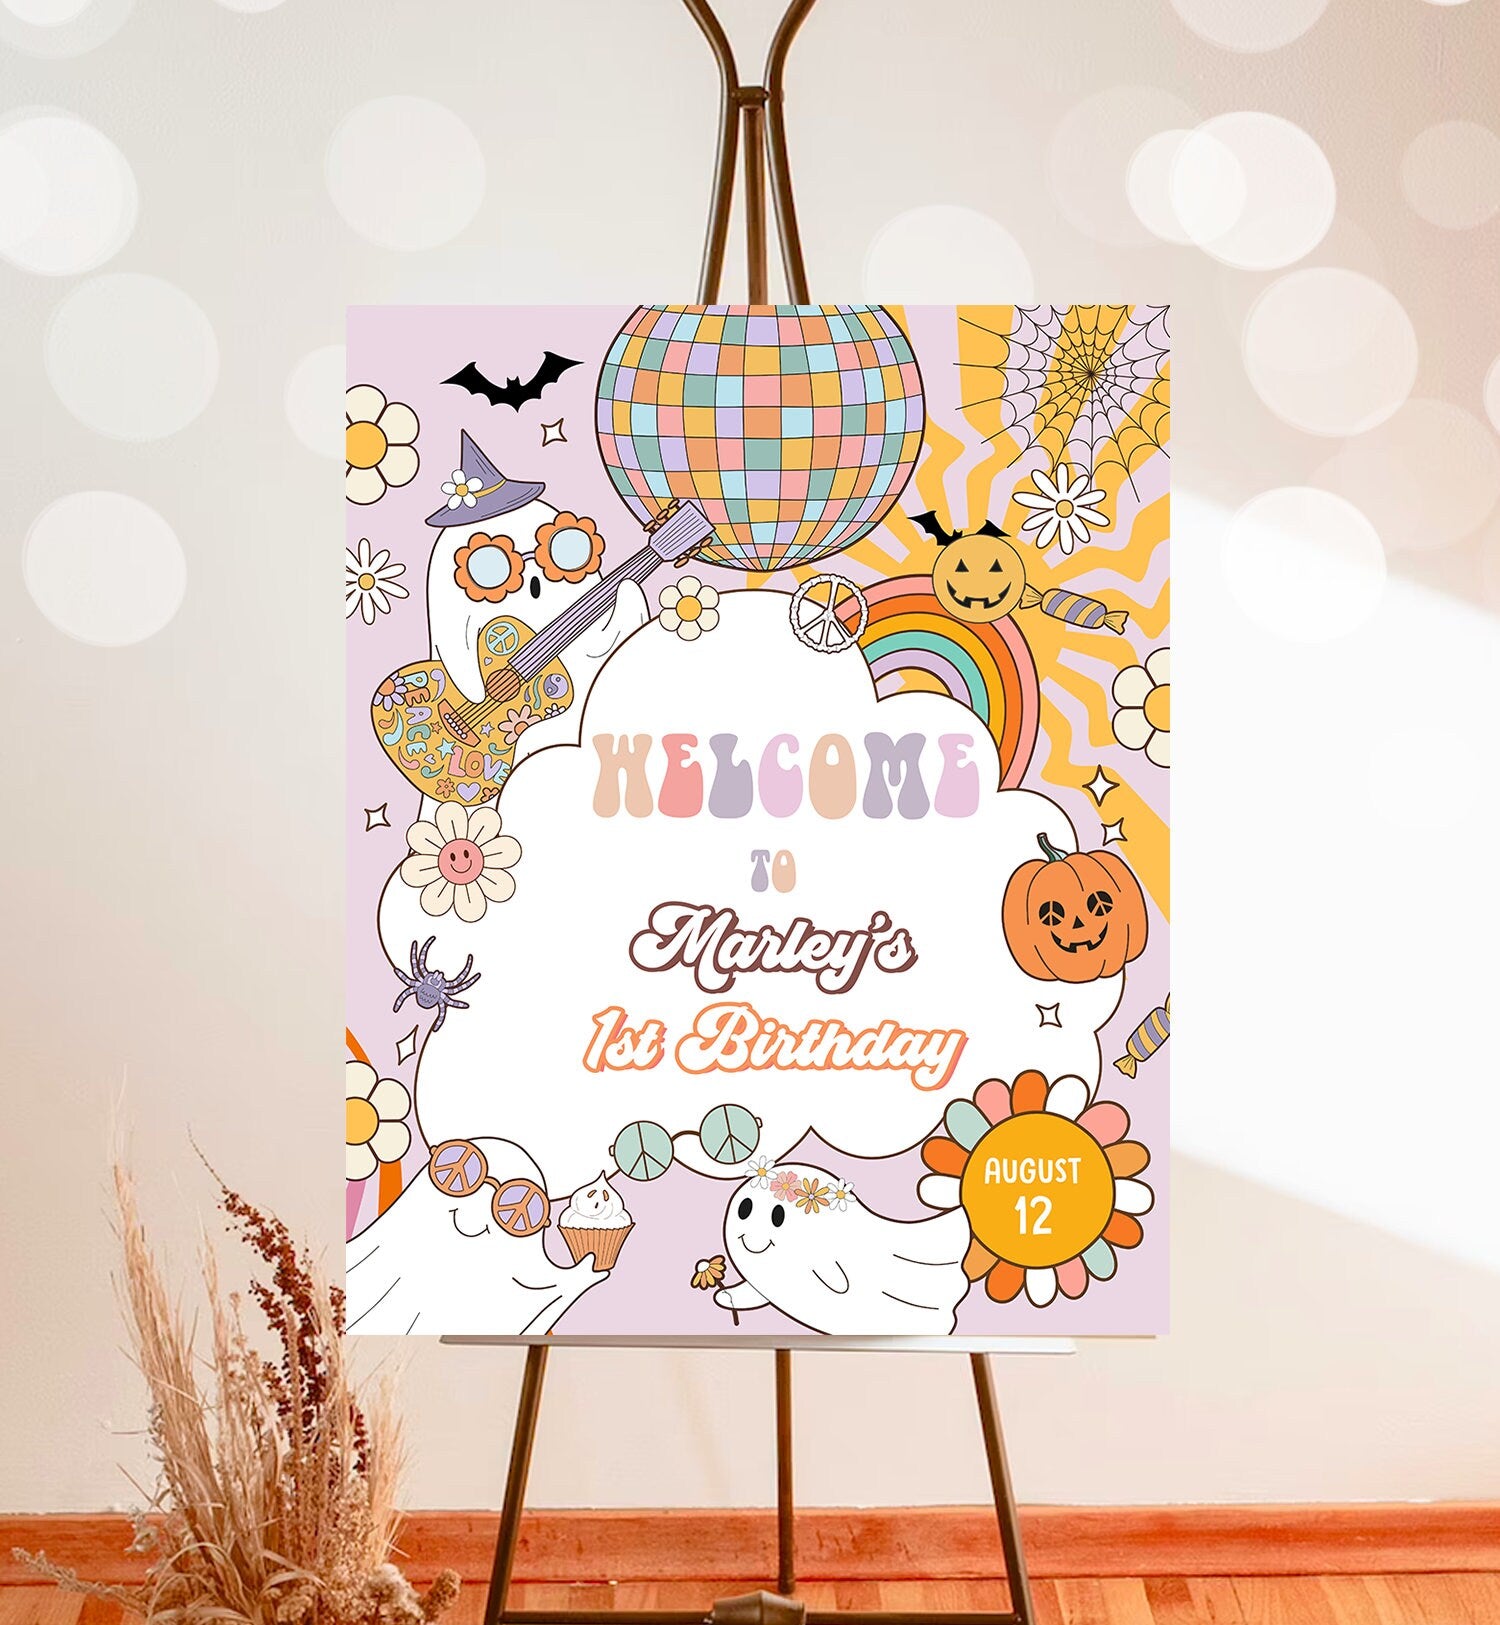 Editable Groovy Halloween Birthday Welcome Sign Floral Boho Spooky Party Retro 70's Hippie Festival Download Template Corjl PRINTABLE 0471